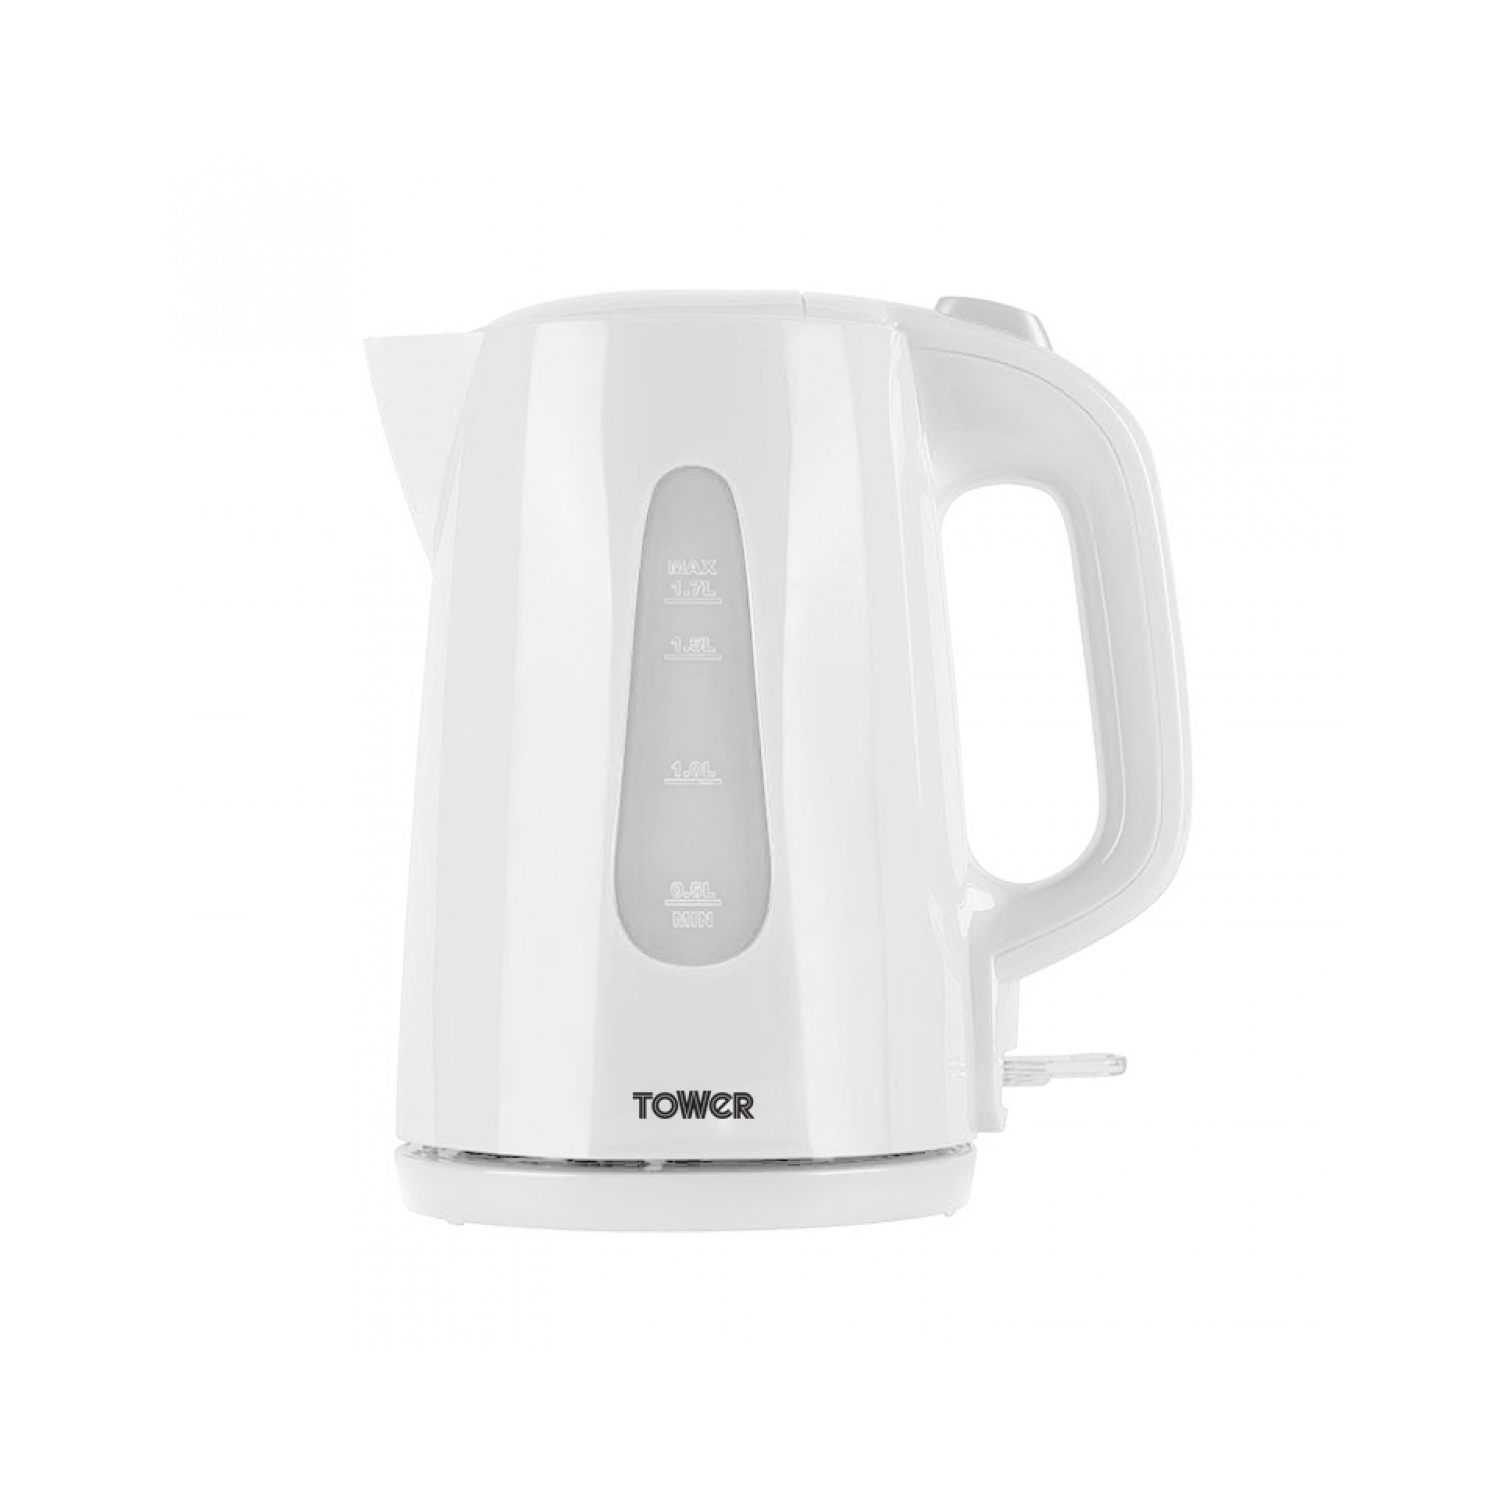 Tower Jug Kettle (white) - 0